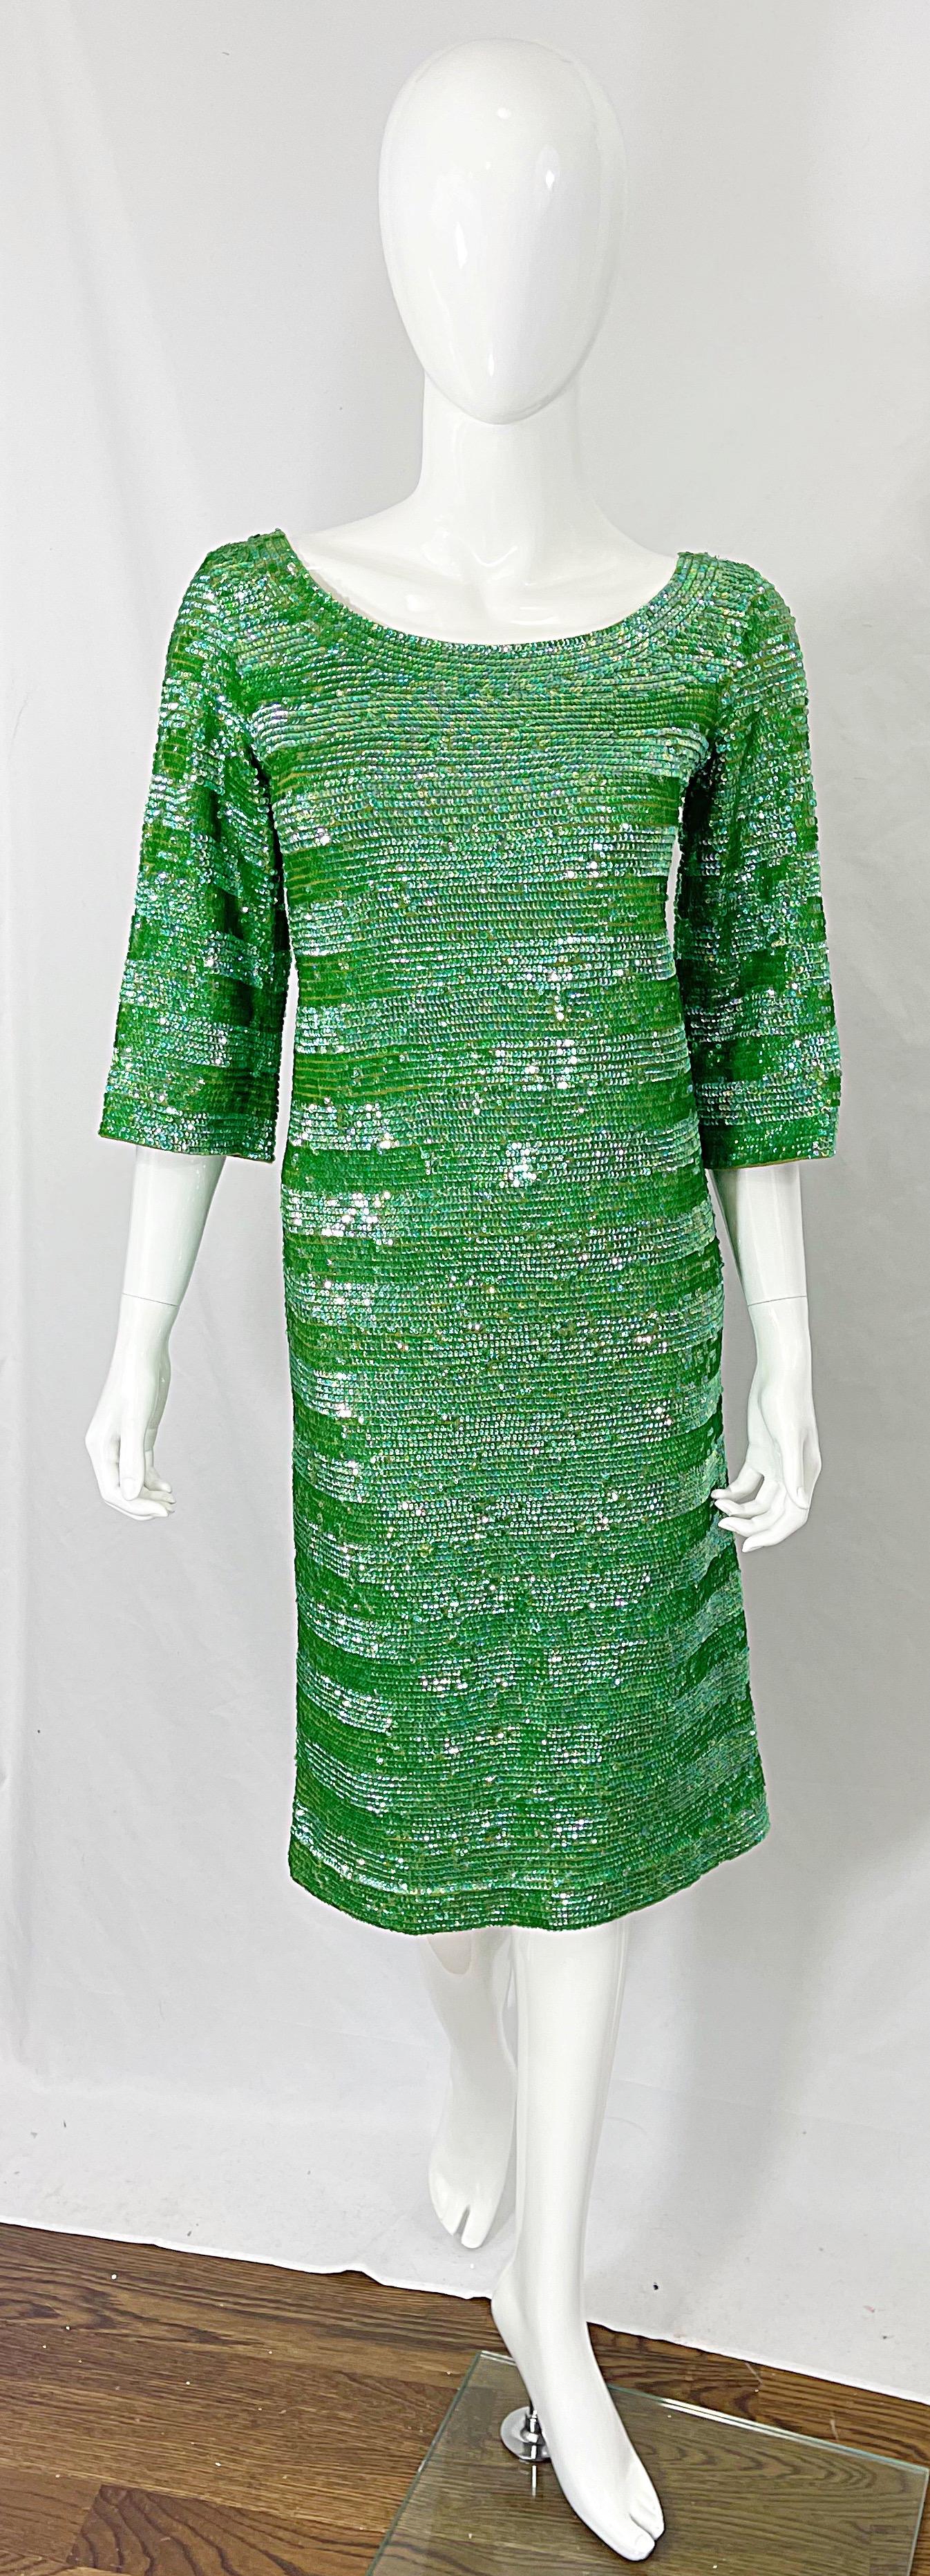 1960s Lime Green Fully Sequined 3/4 Sleeves Vintage 60s Wool Dress For Sale 6